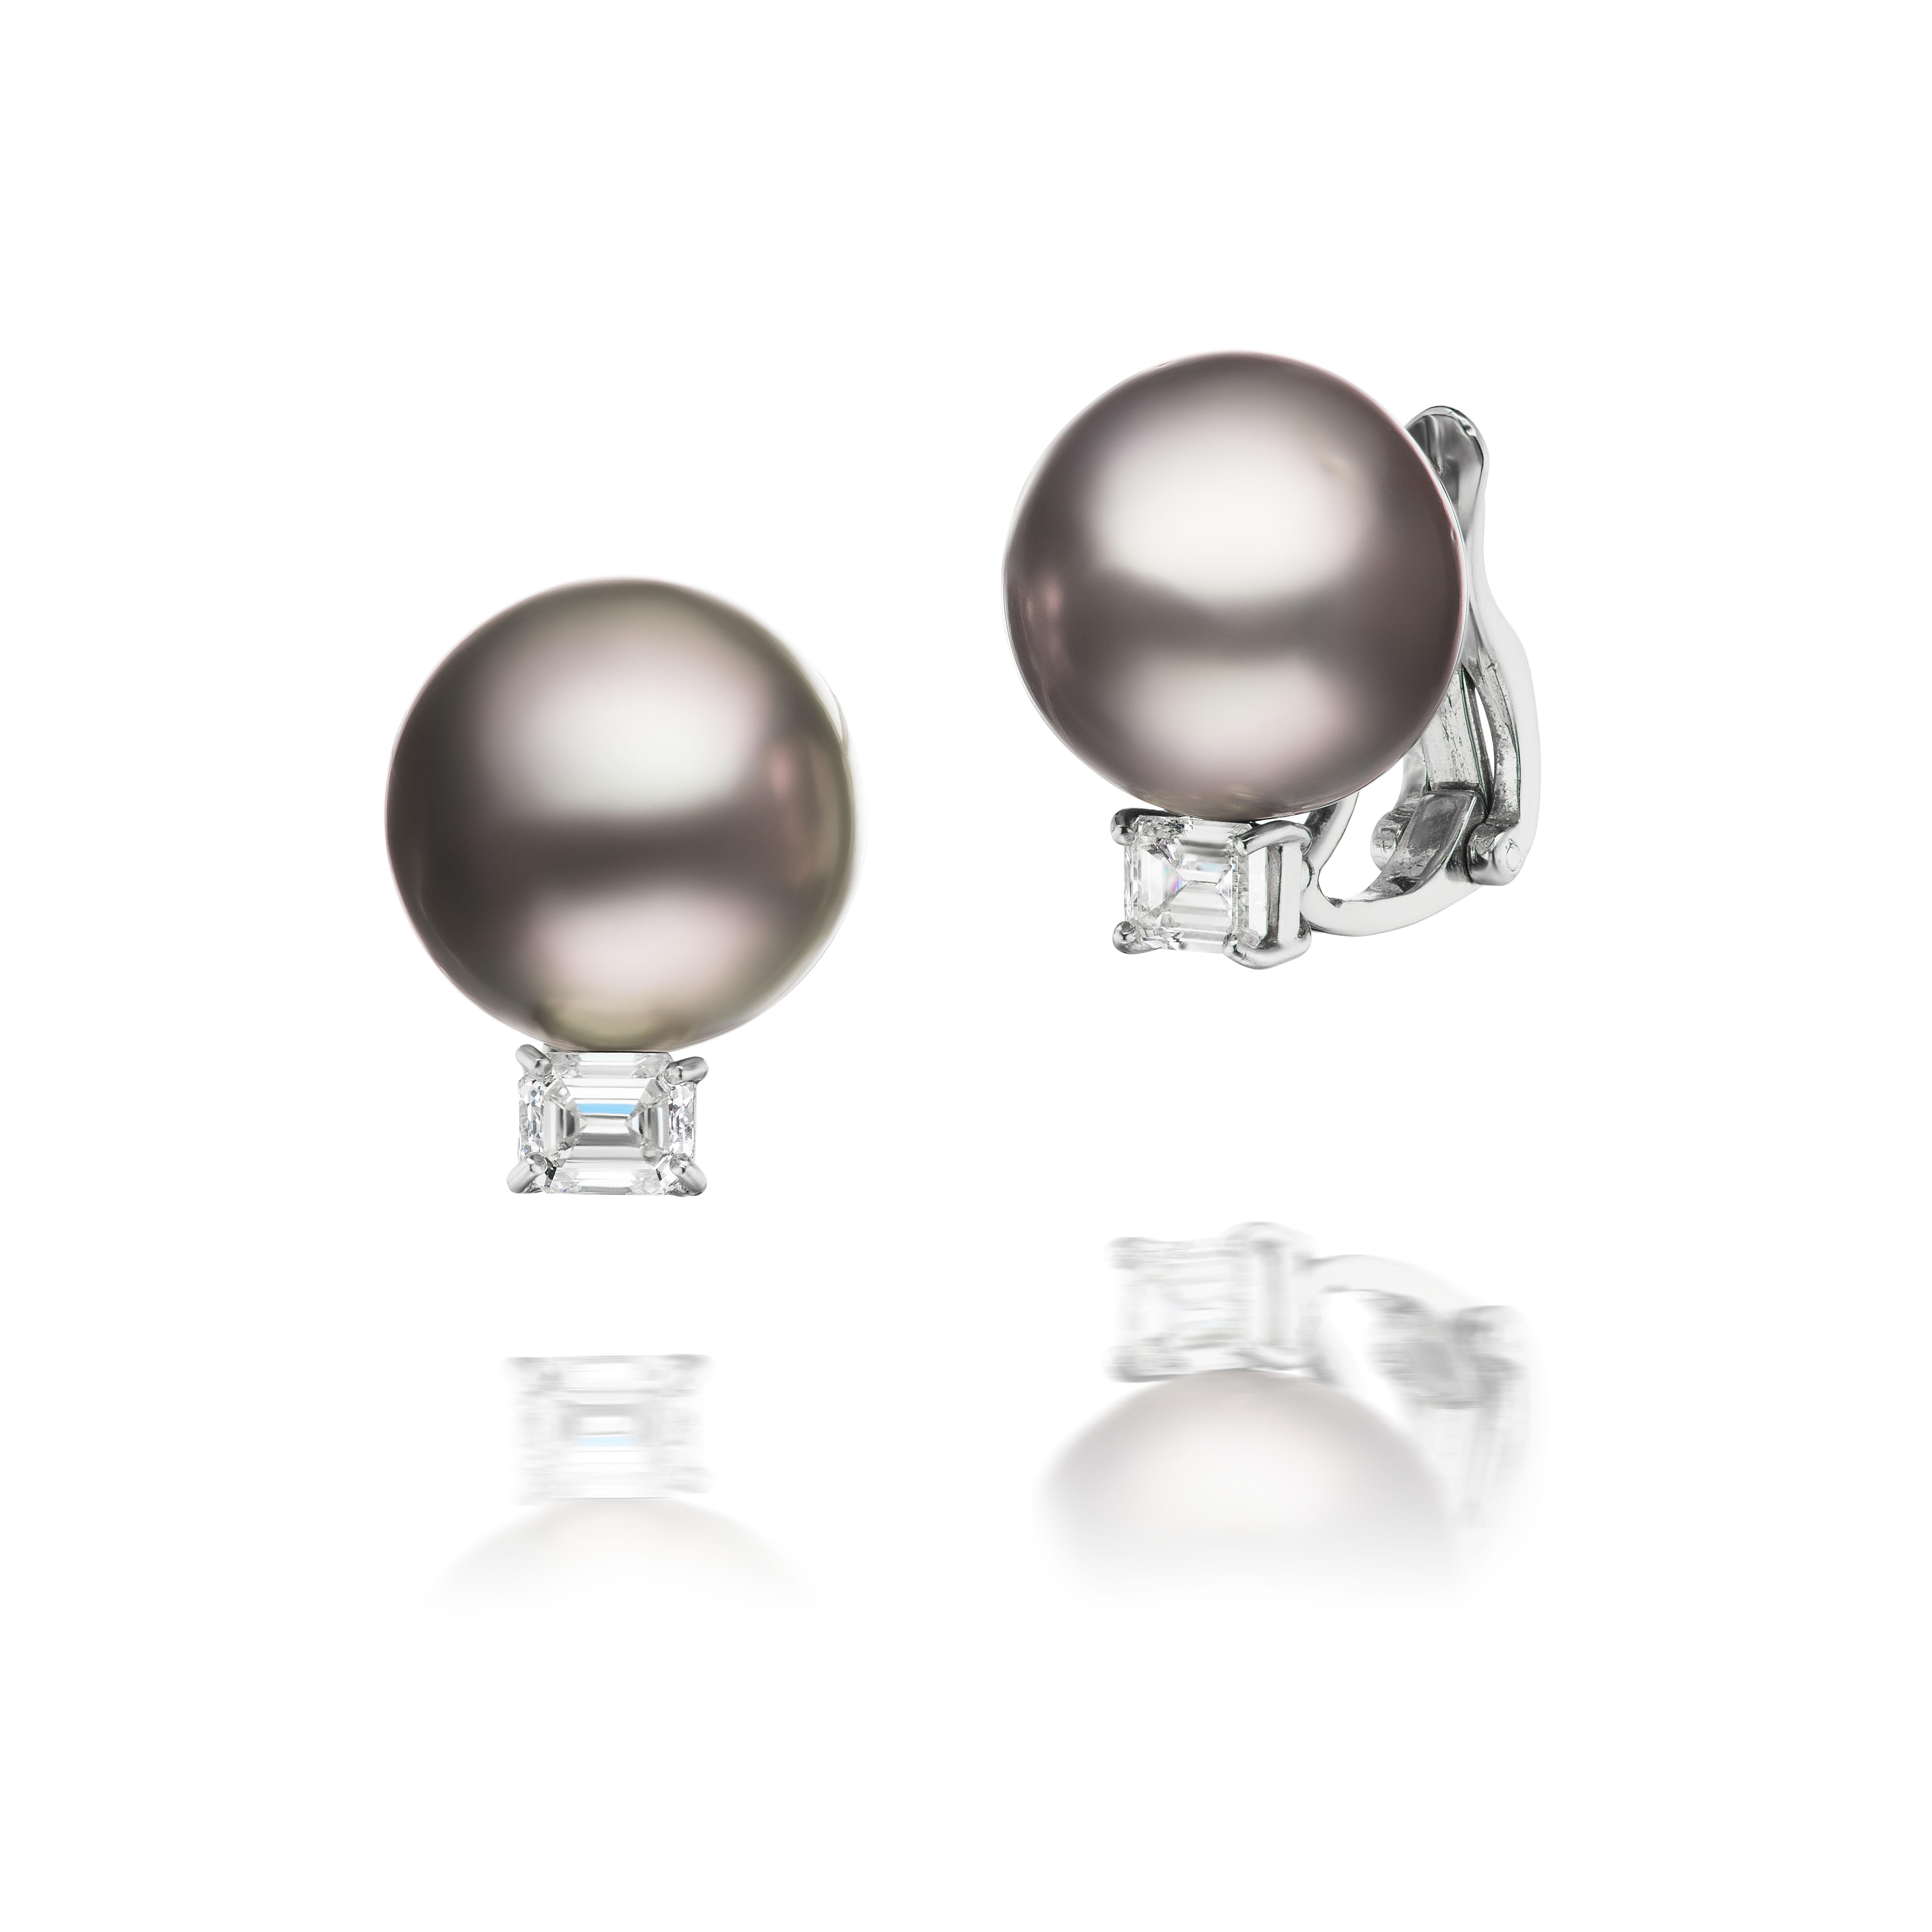 Two lovely 15mm black South Sea pearls are adorned with emerald cut diamonds weighing approximately 1.20 carats total and mounted in platinum.

The diamonds are H/I color and VS clarity